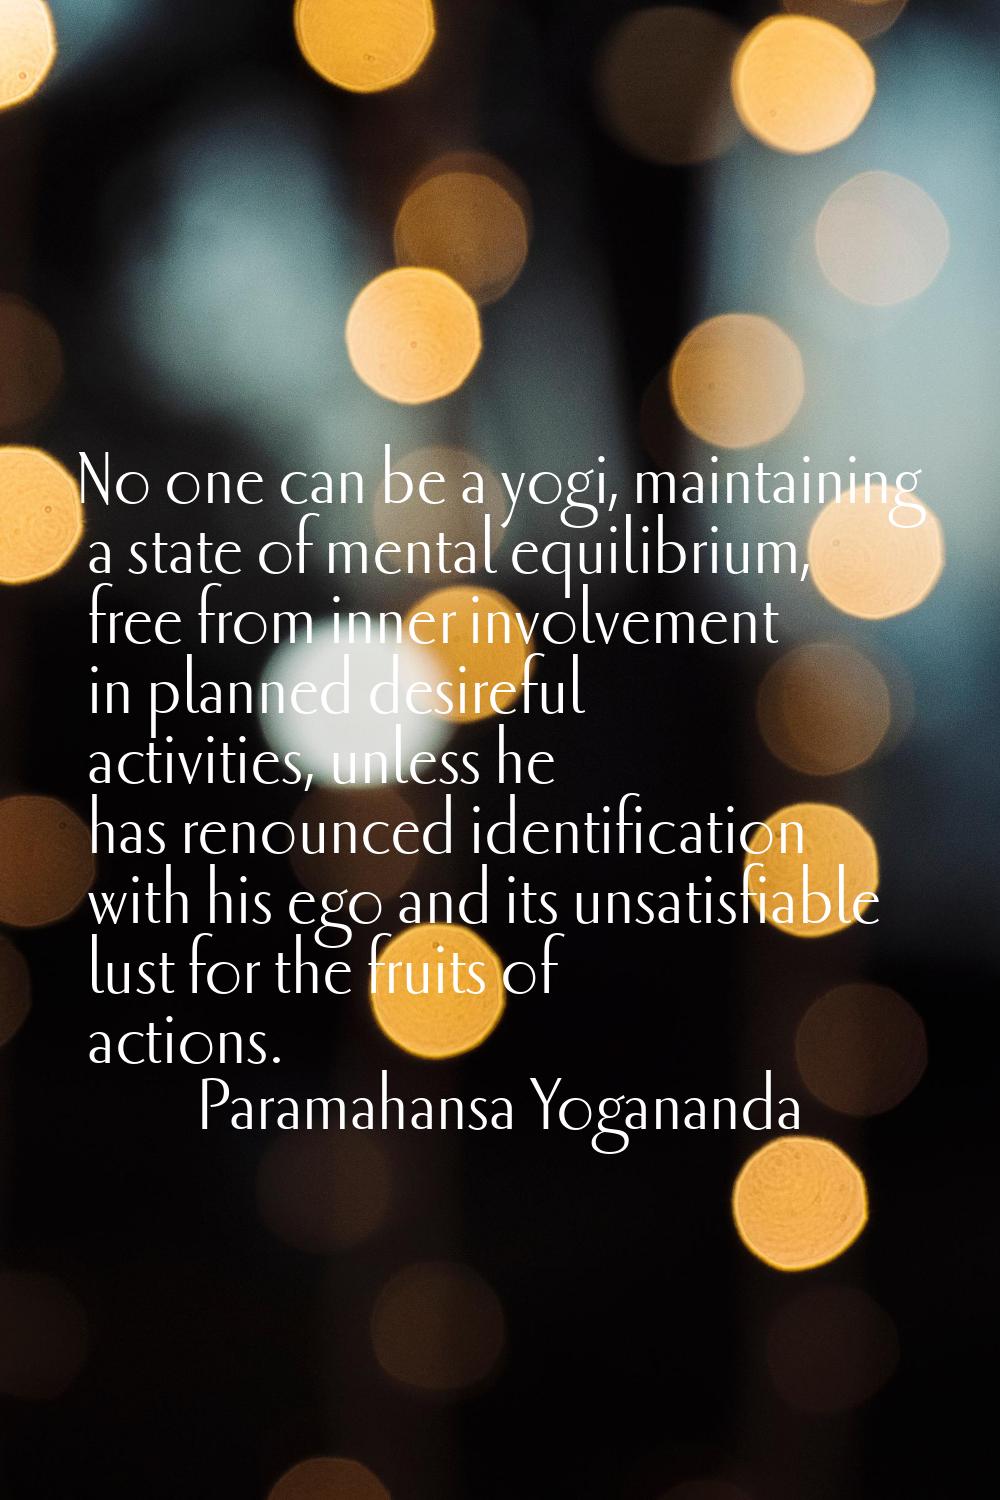 No one can be a yogi, maintaining a state of mental equilibrium, free from inner involvement in pla